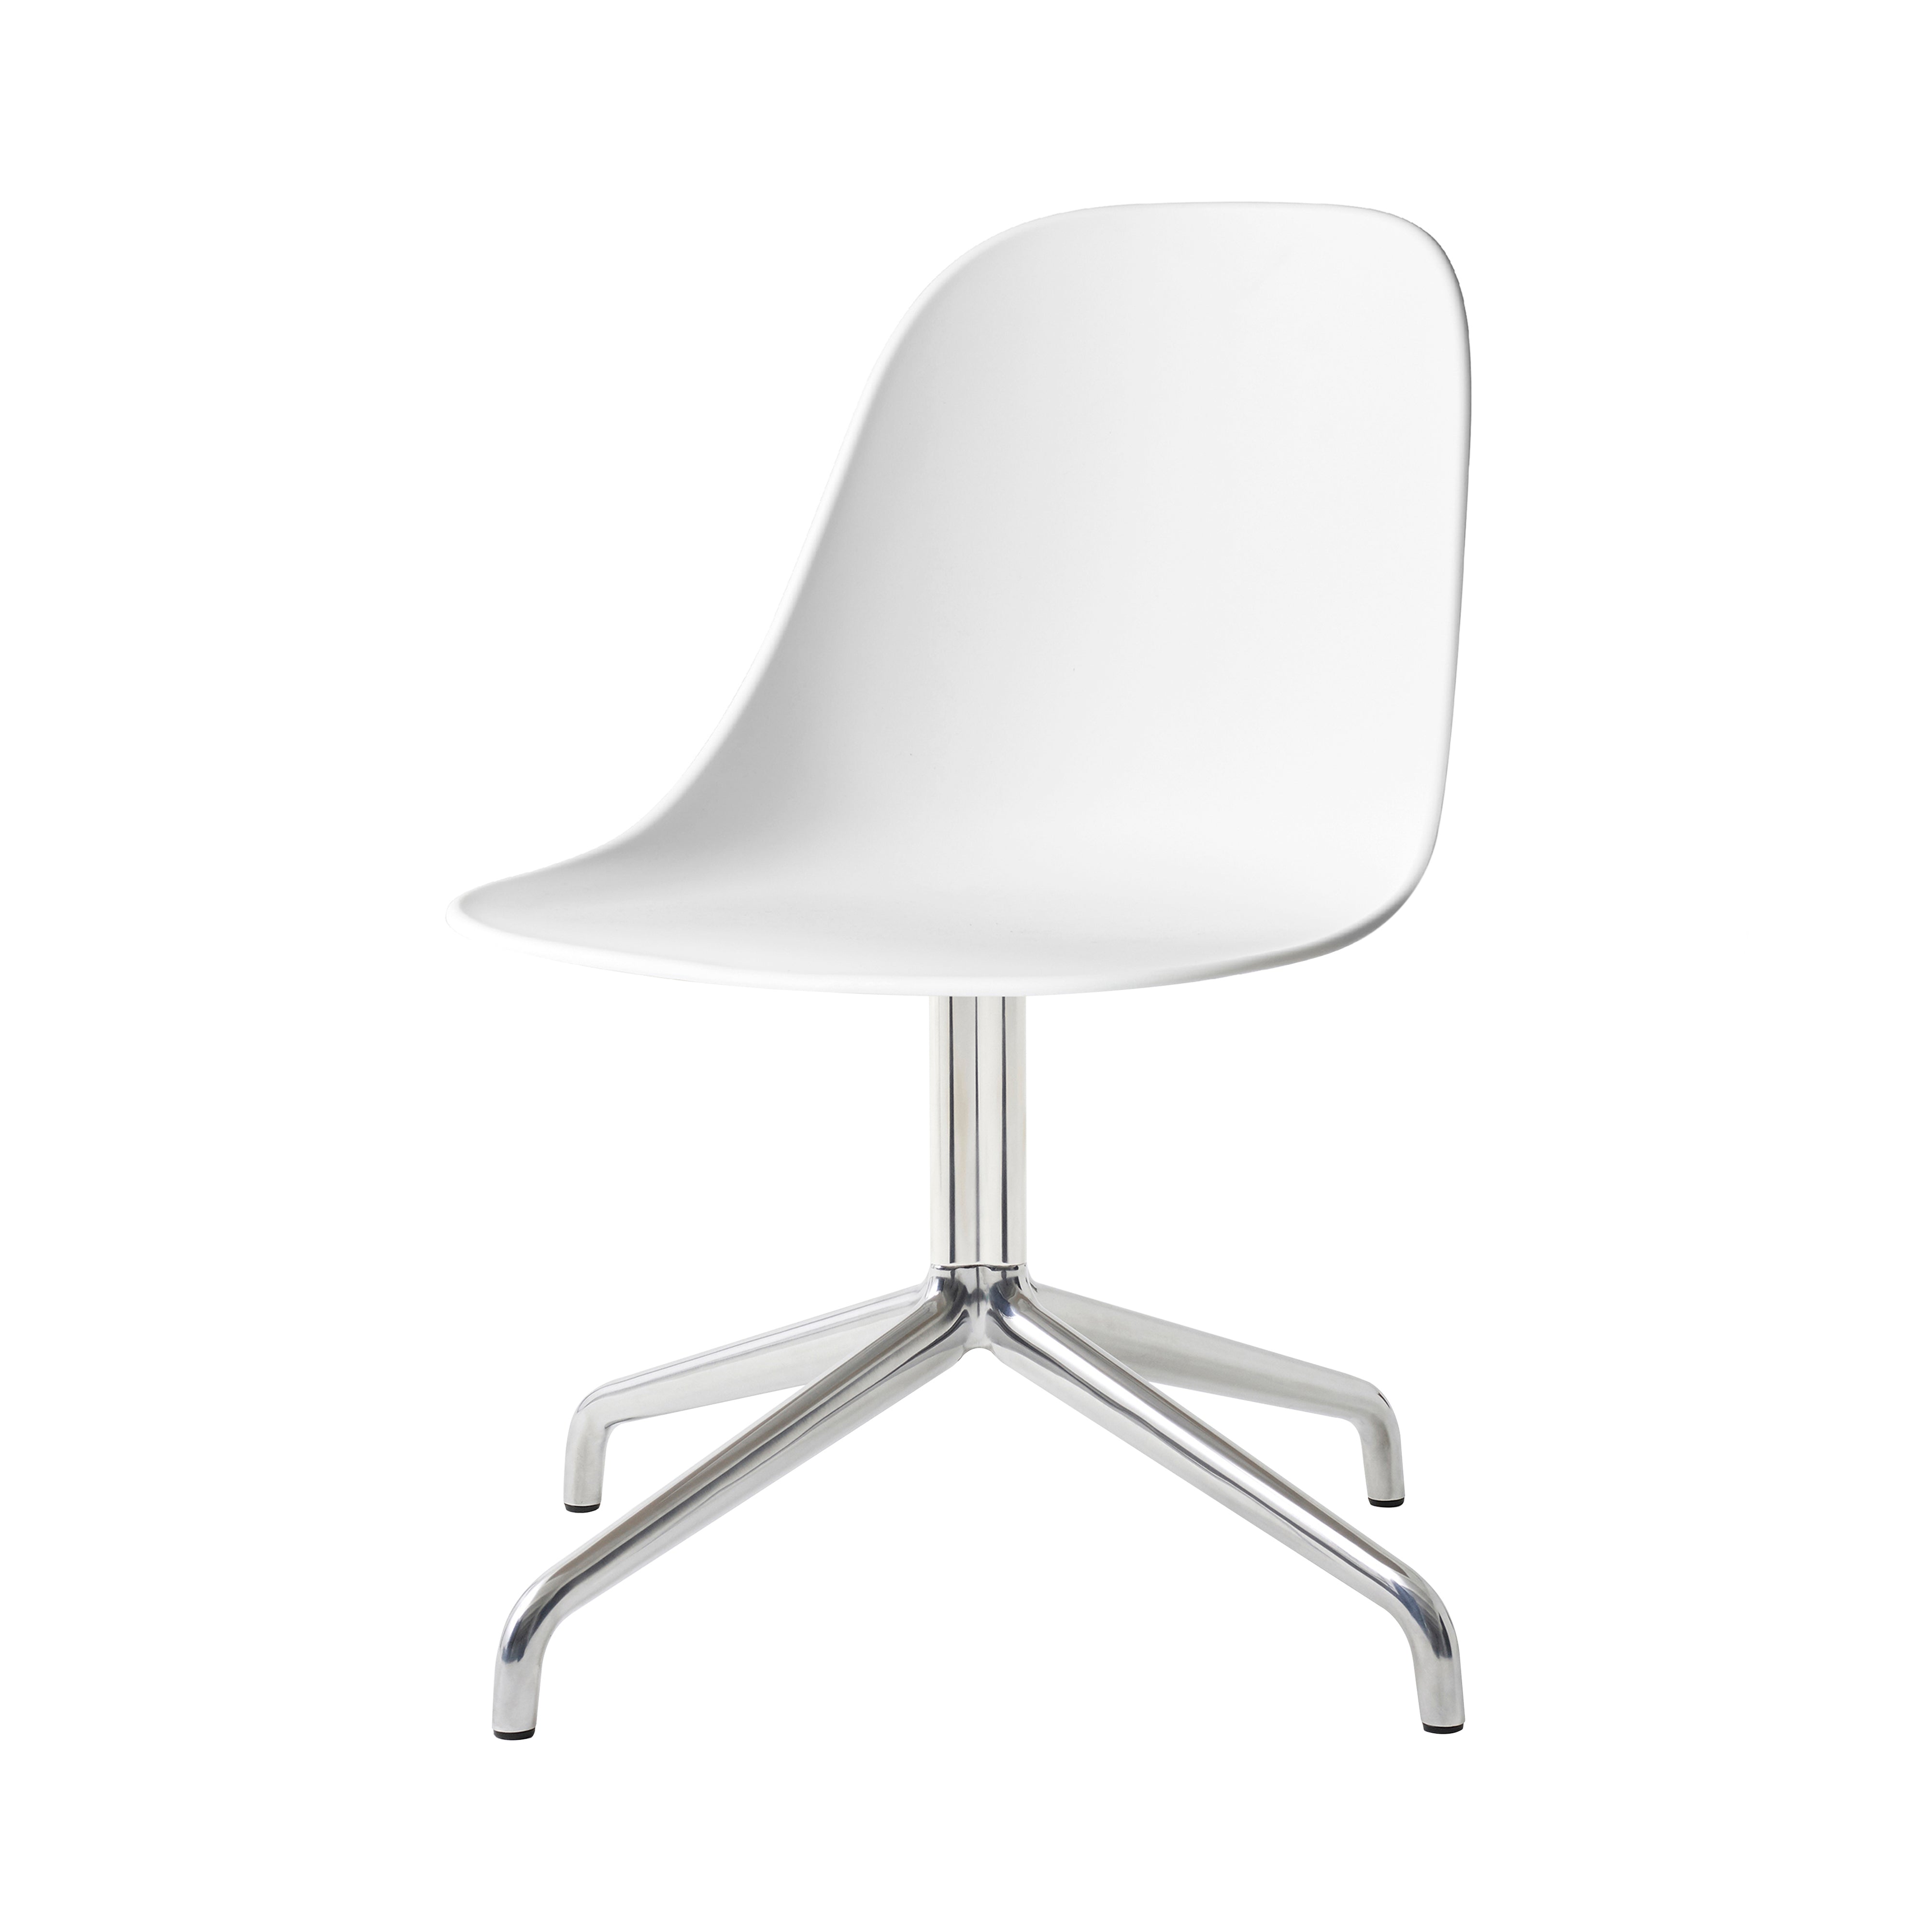 Harbour Swivel Side Chair: Polished Aluminum + White